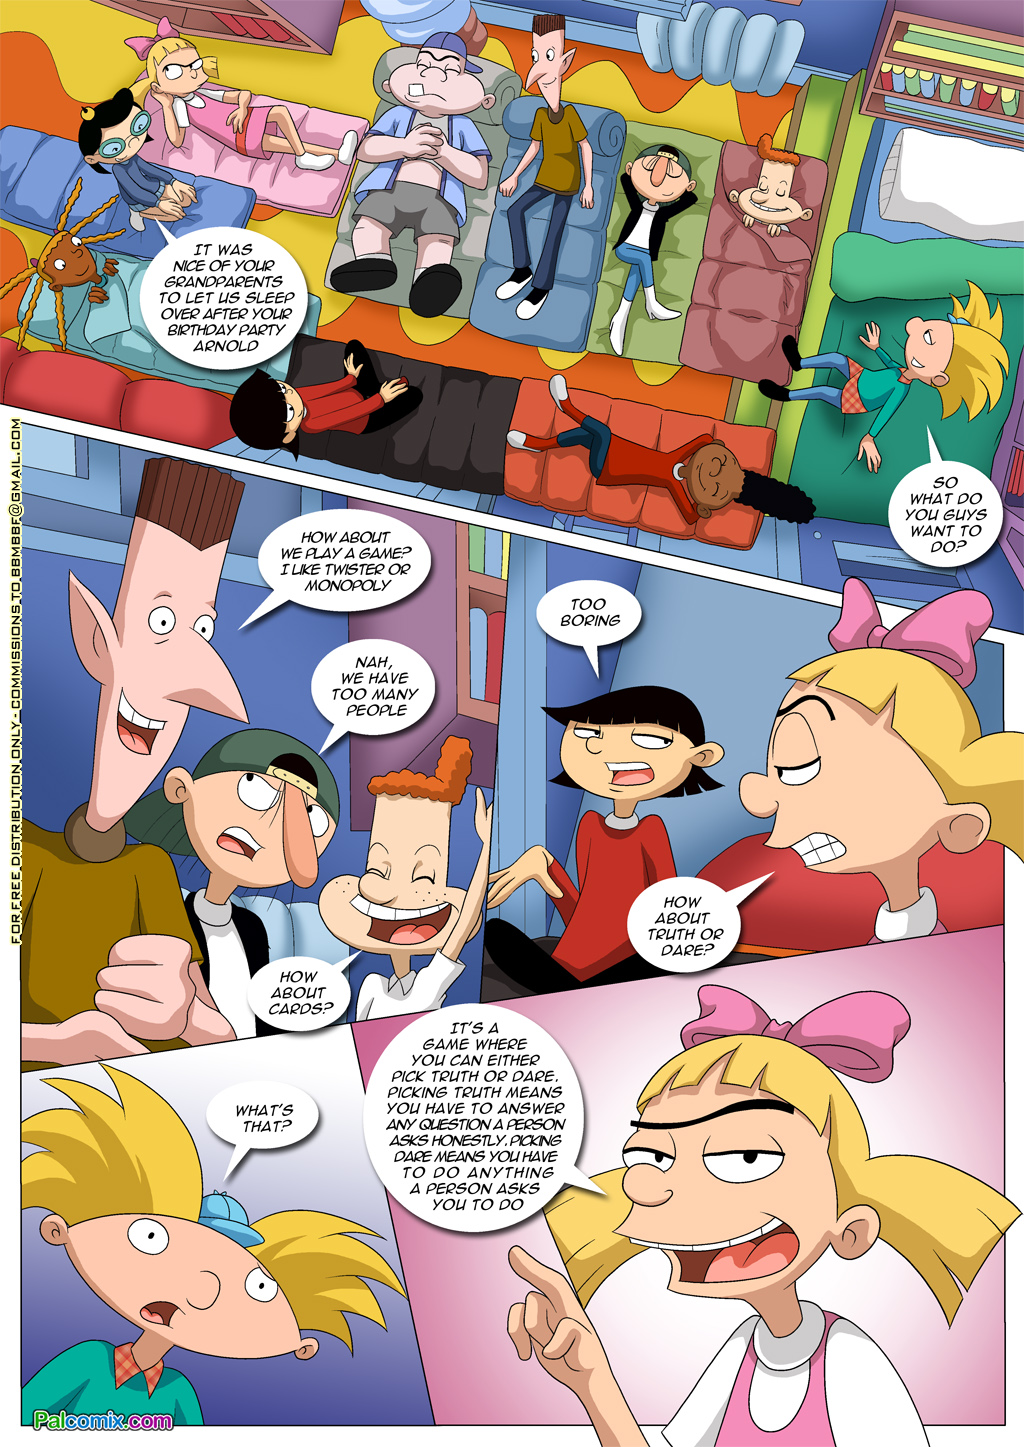 After Party After Party!-page01.jpg